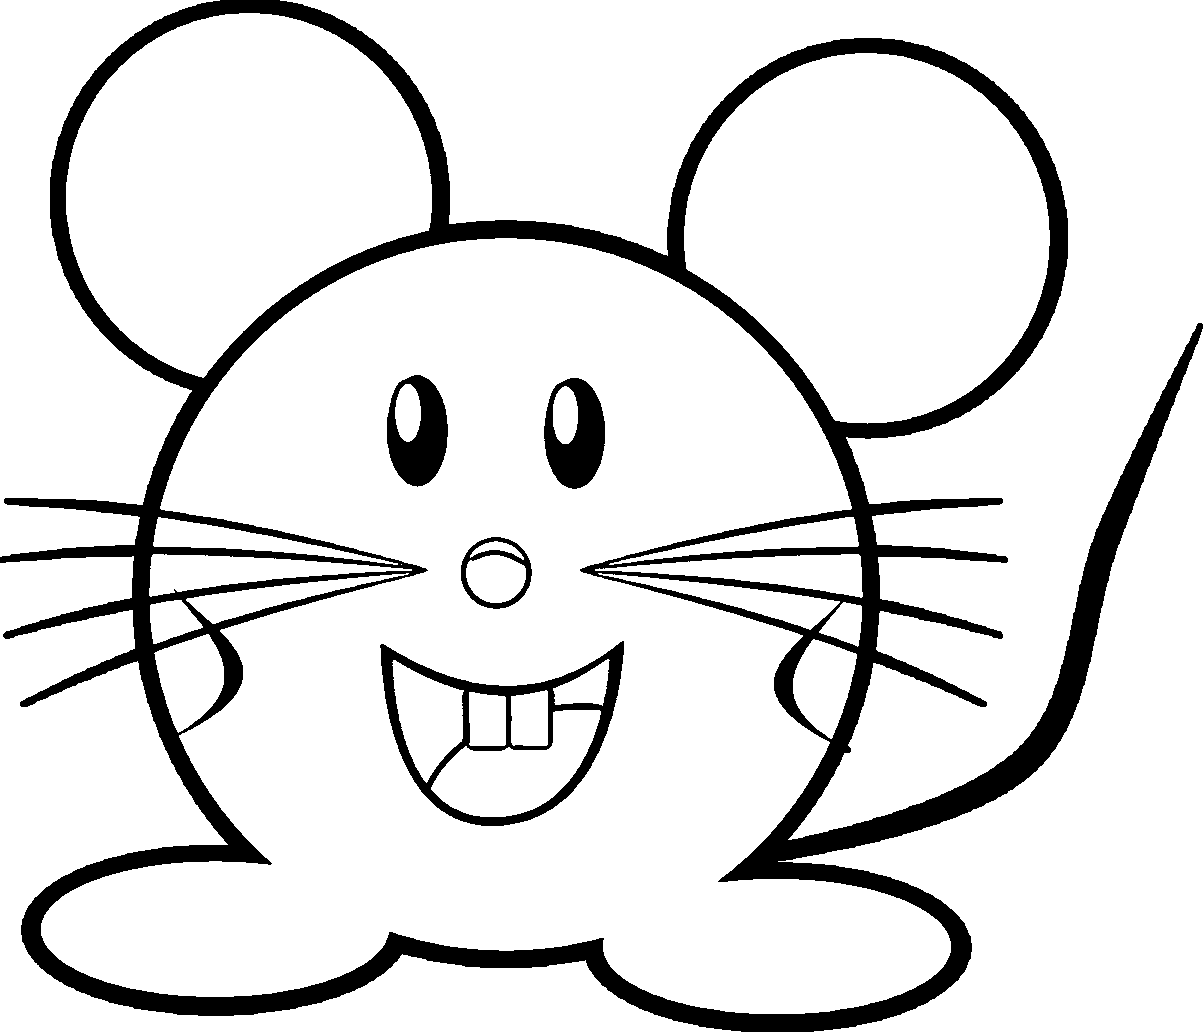 Computer Mouse Sketch Sketch Coloring Page
